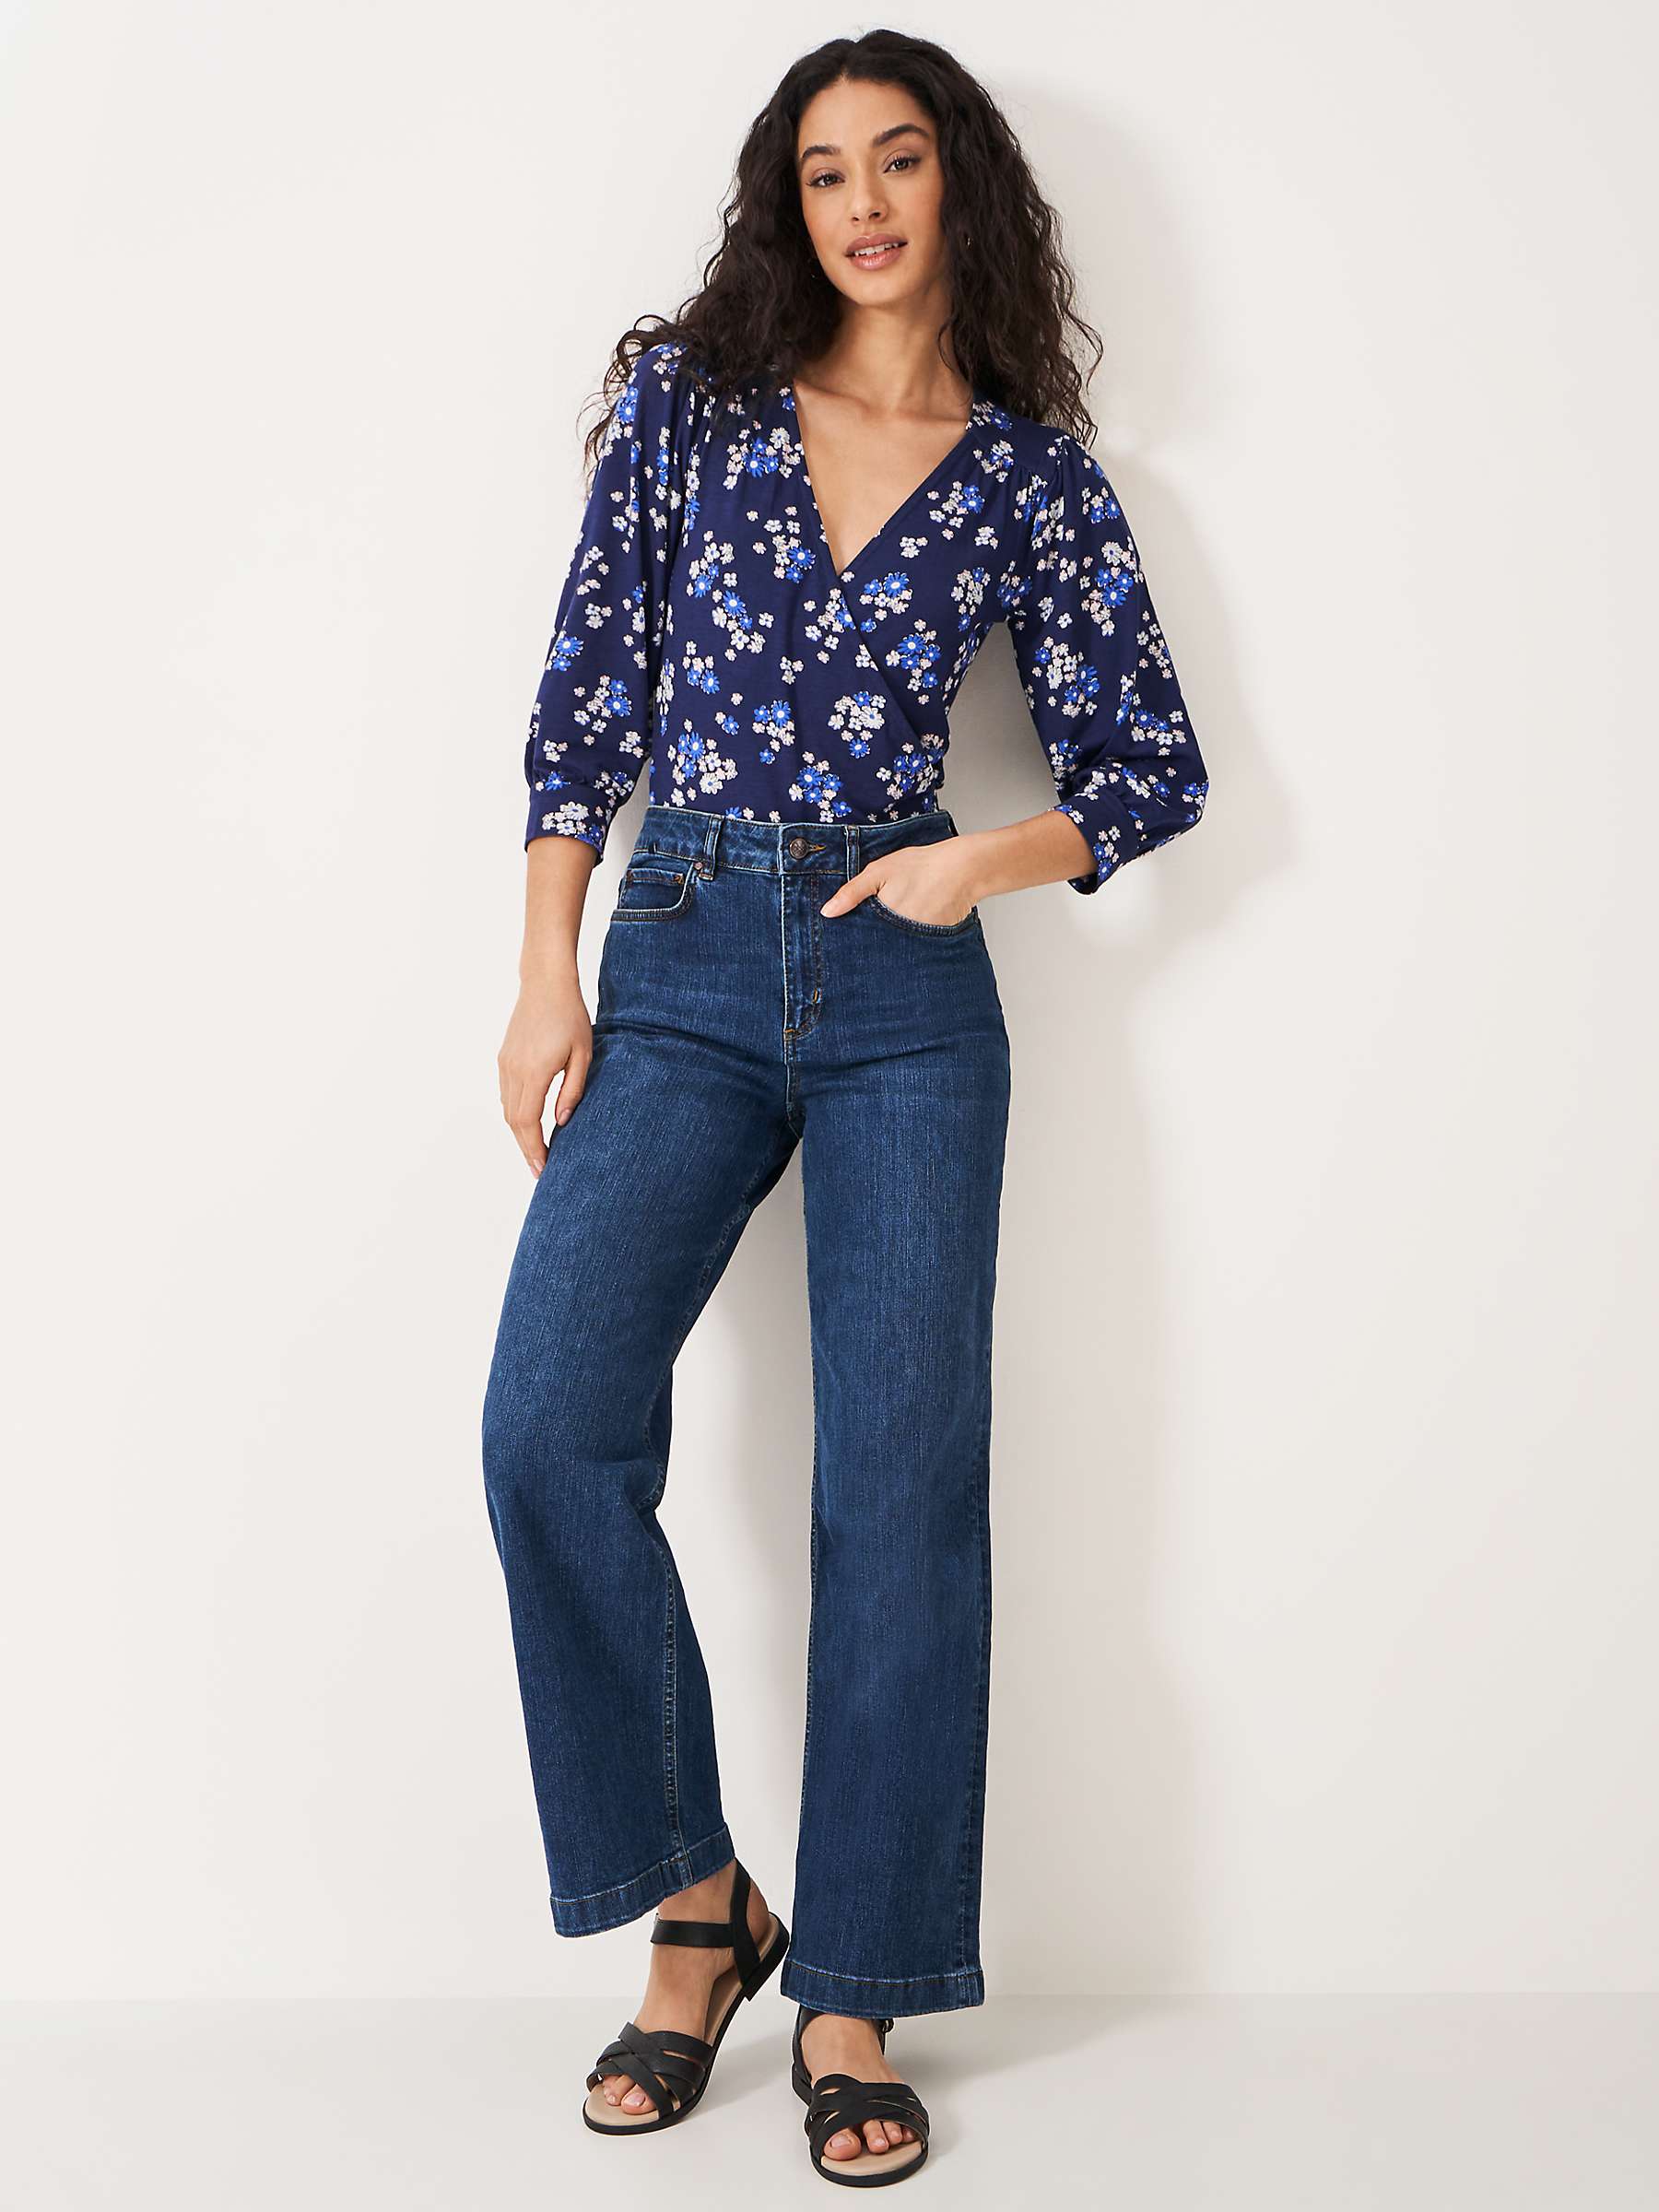 Buy Crew Clothing Wrap Top Online at johnlewis.com